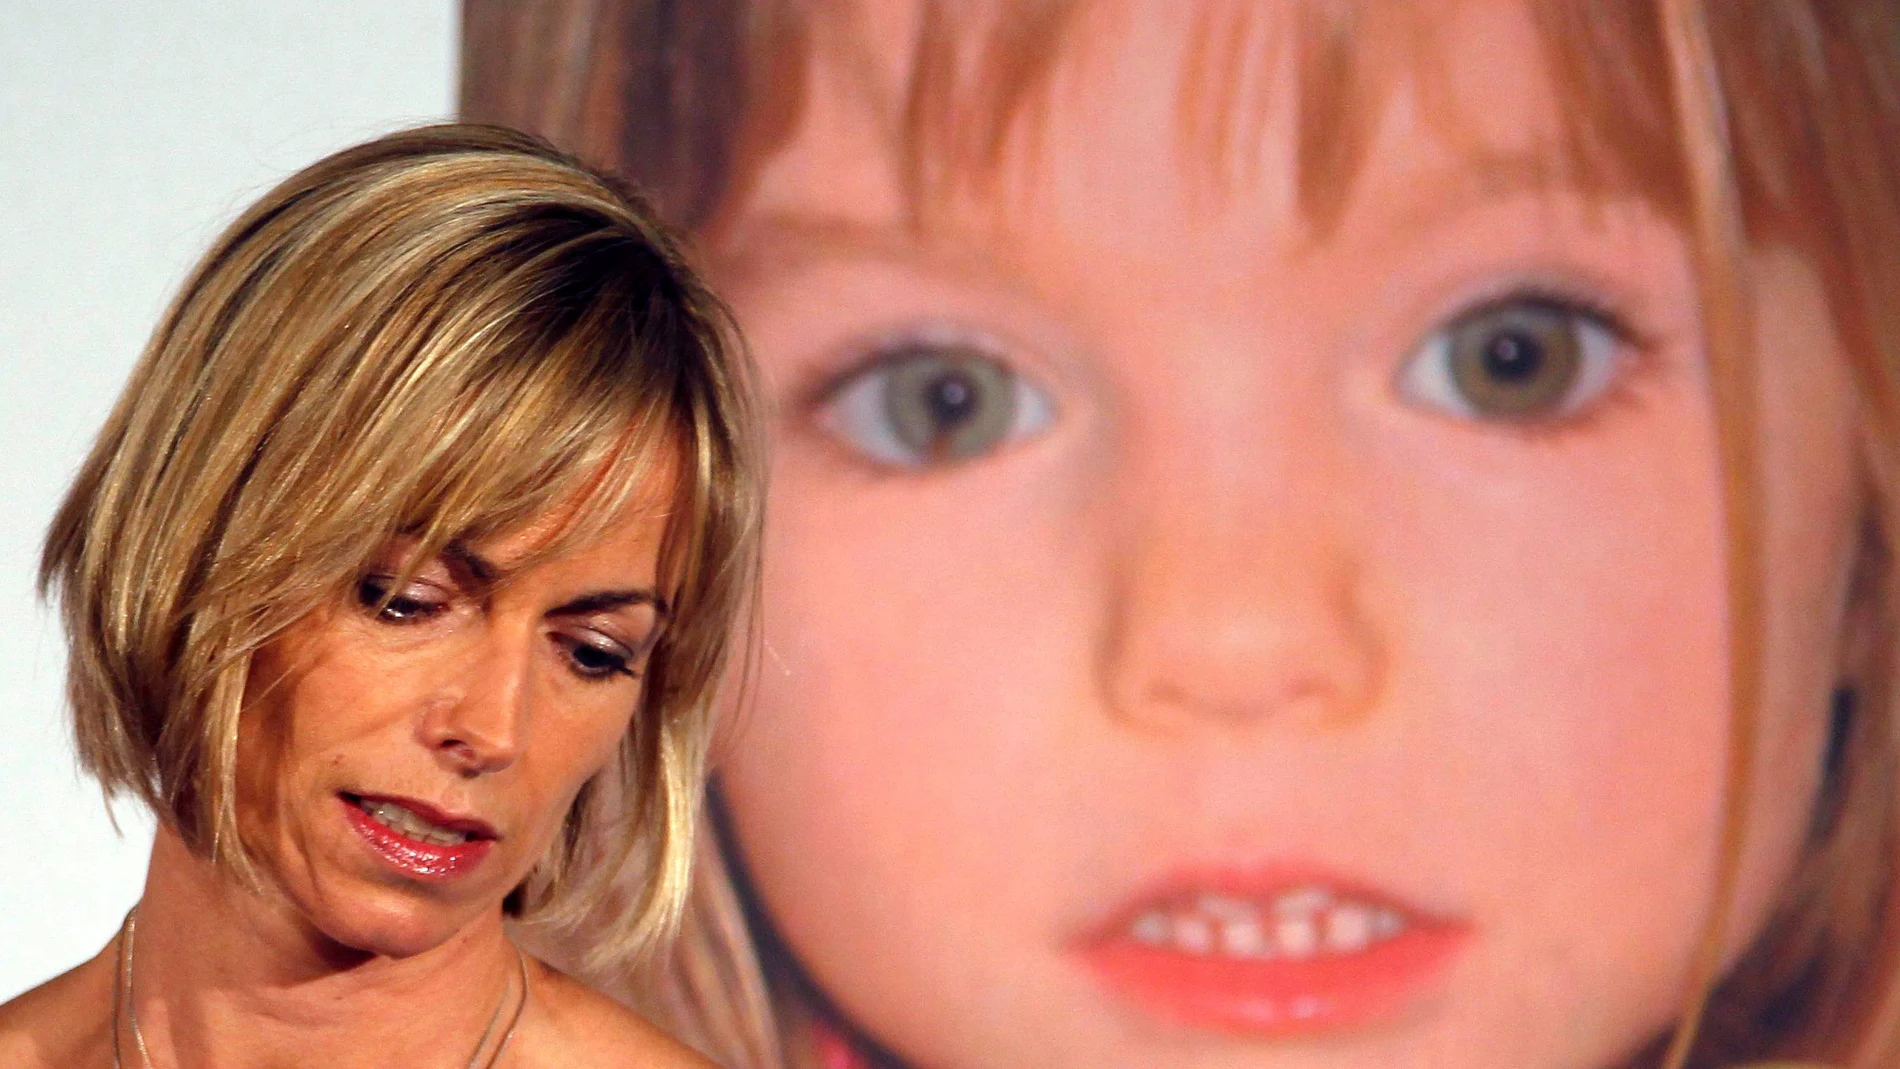 FILE PHOTO: Kate McCann, whose daughter Madeleine went missing during a family holiday to Portugal in 2007, attends a news conference at the launch of her book in London